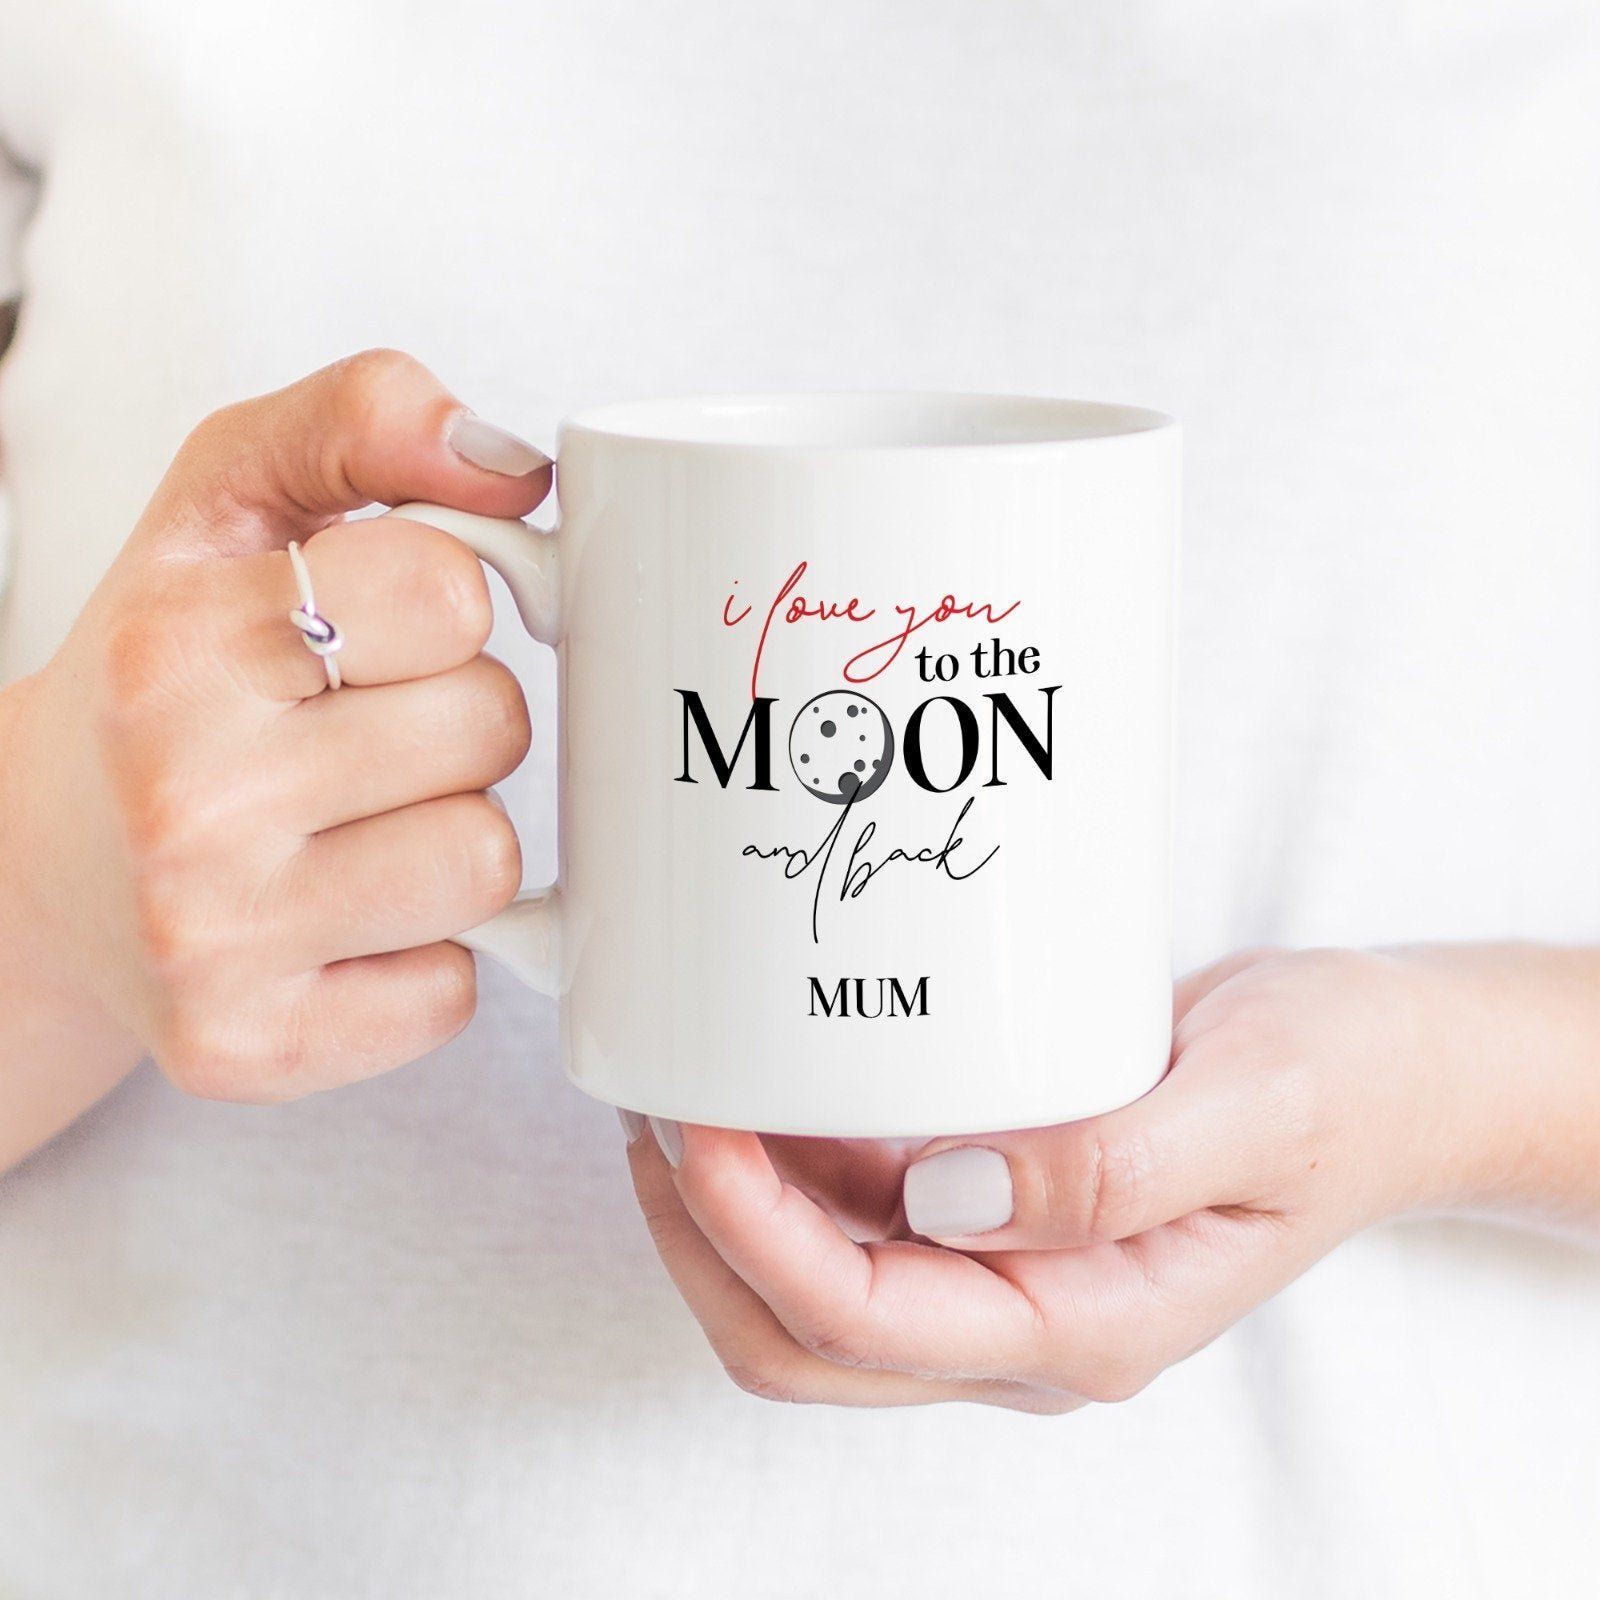 I love you to the moon and back mum mug, Gift for mum, Mother's Day gift, Pregnancy announcement